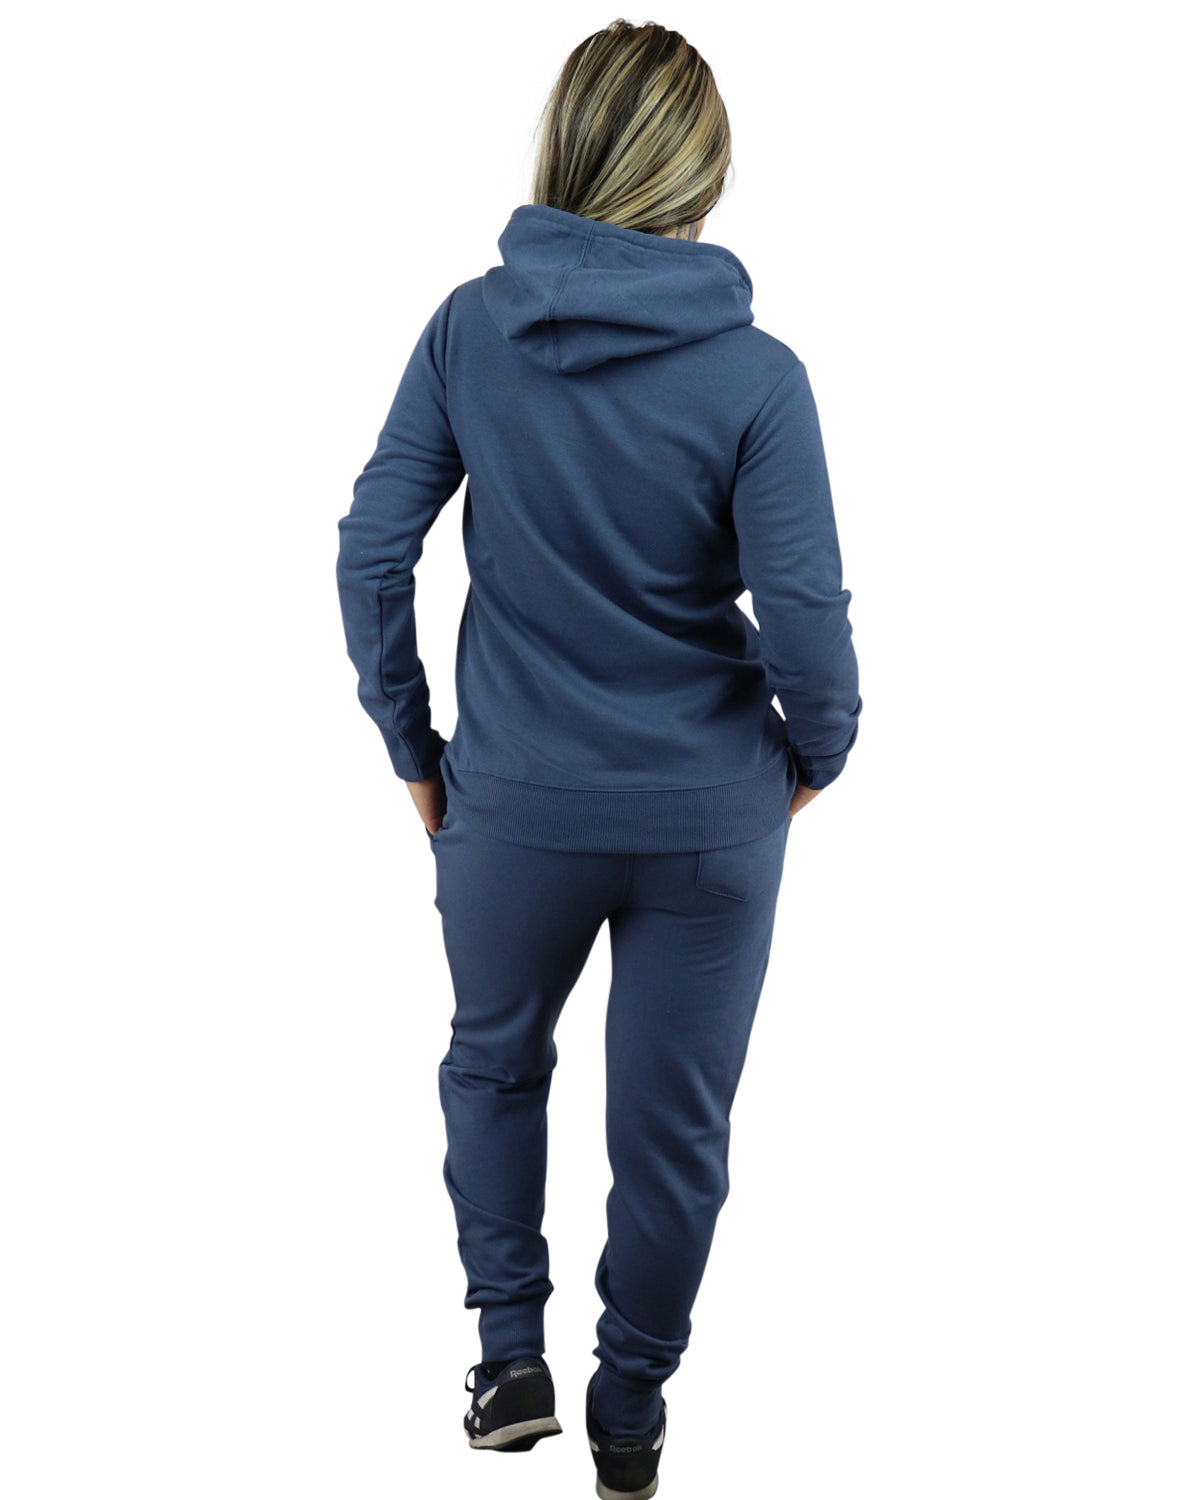 French Terry Fashion Jogger Sets for Women